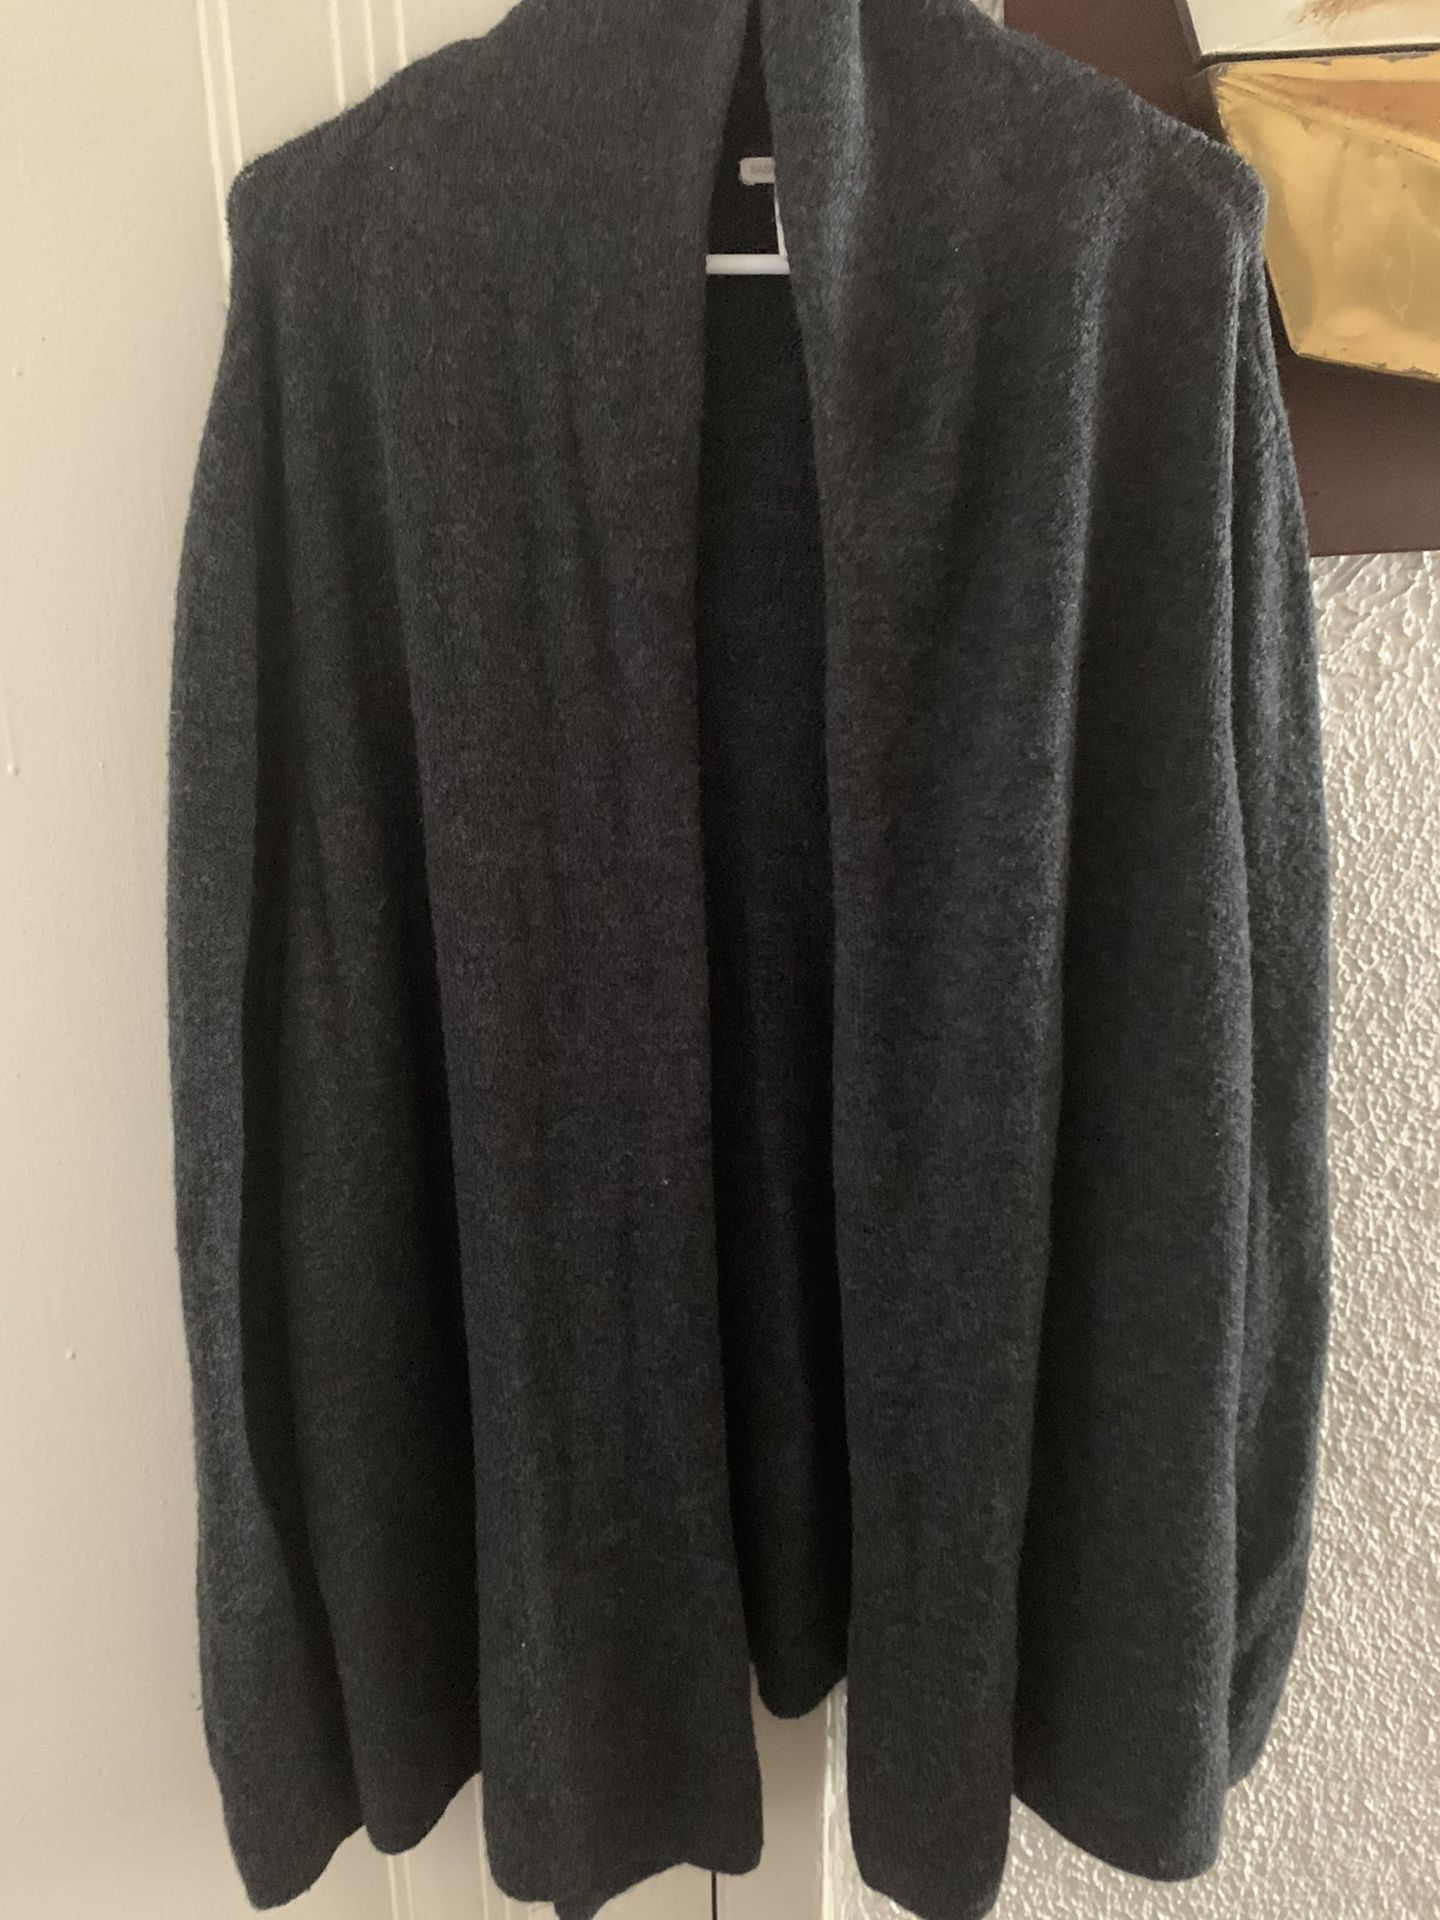 H&M Women’s XL thick open front cardigan